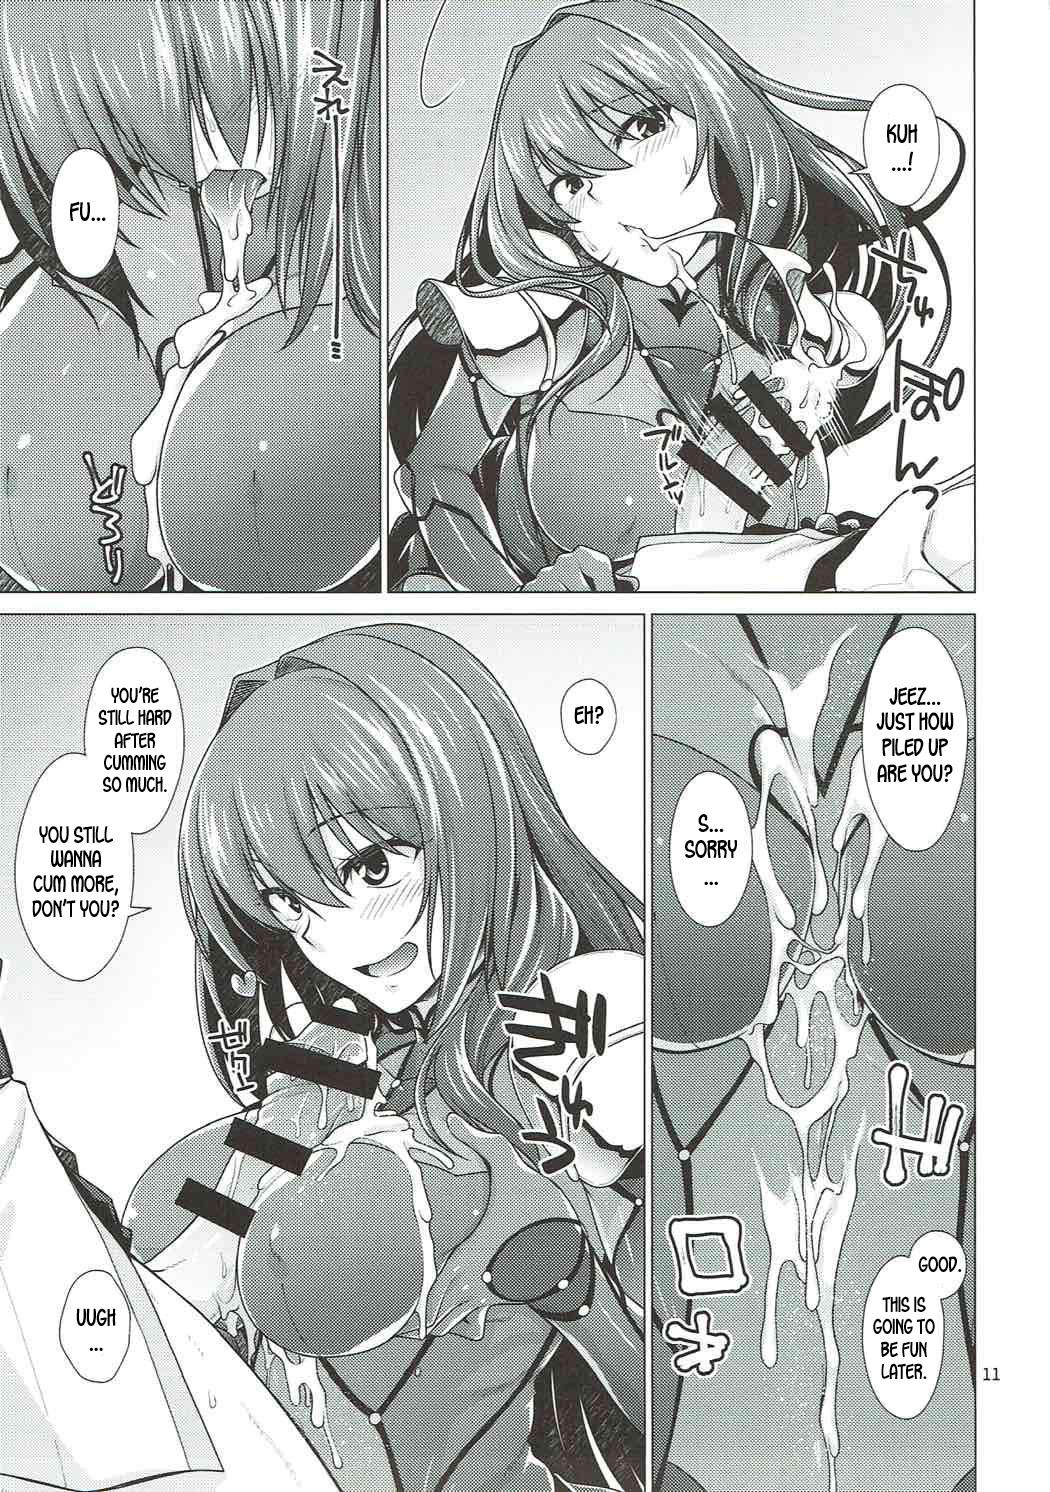 Girl On Girl Scathach Shishou to Celt Shiki Gachihamex! - Fate grand order Petera - Page 10